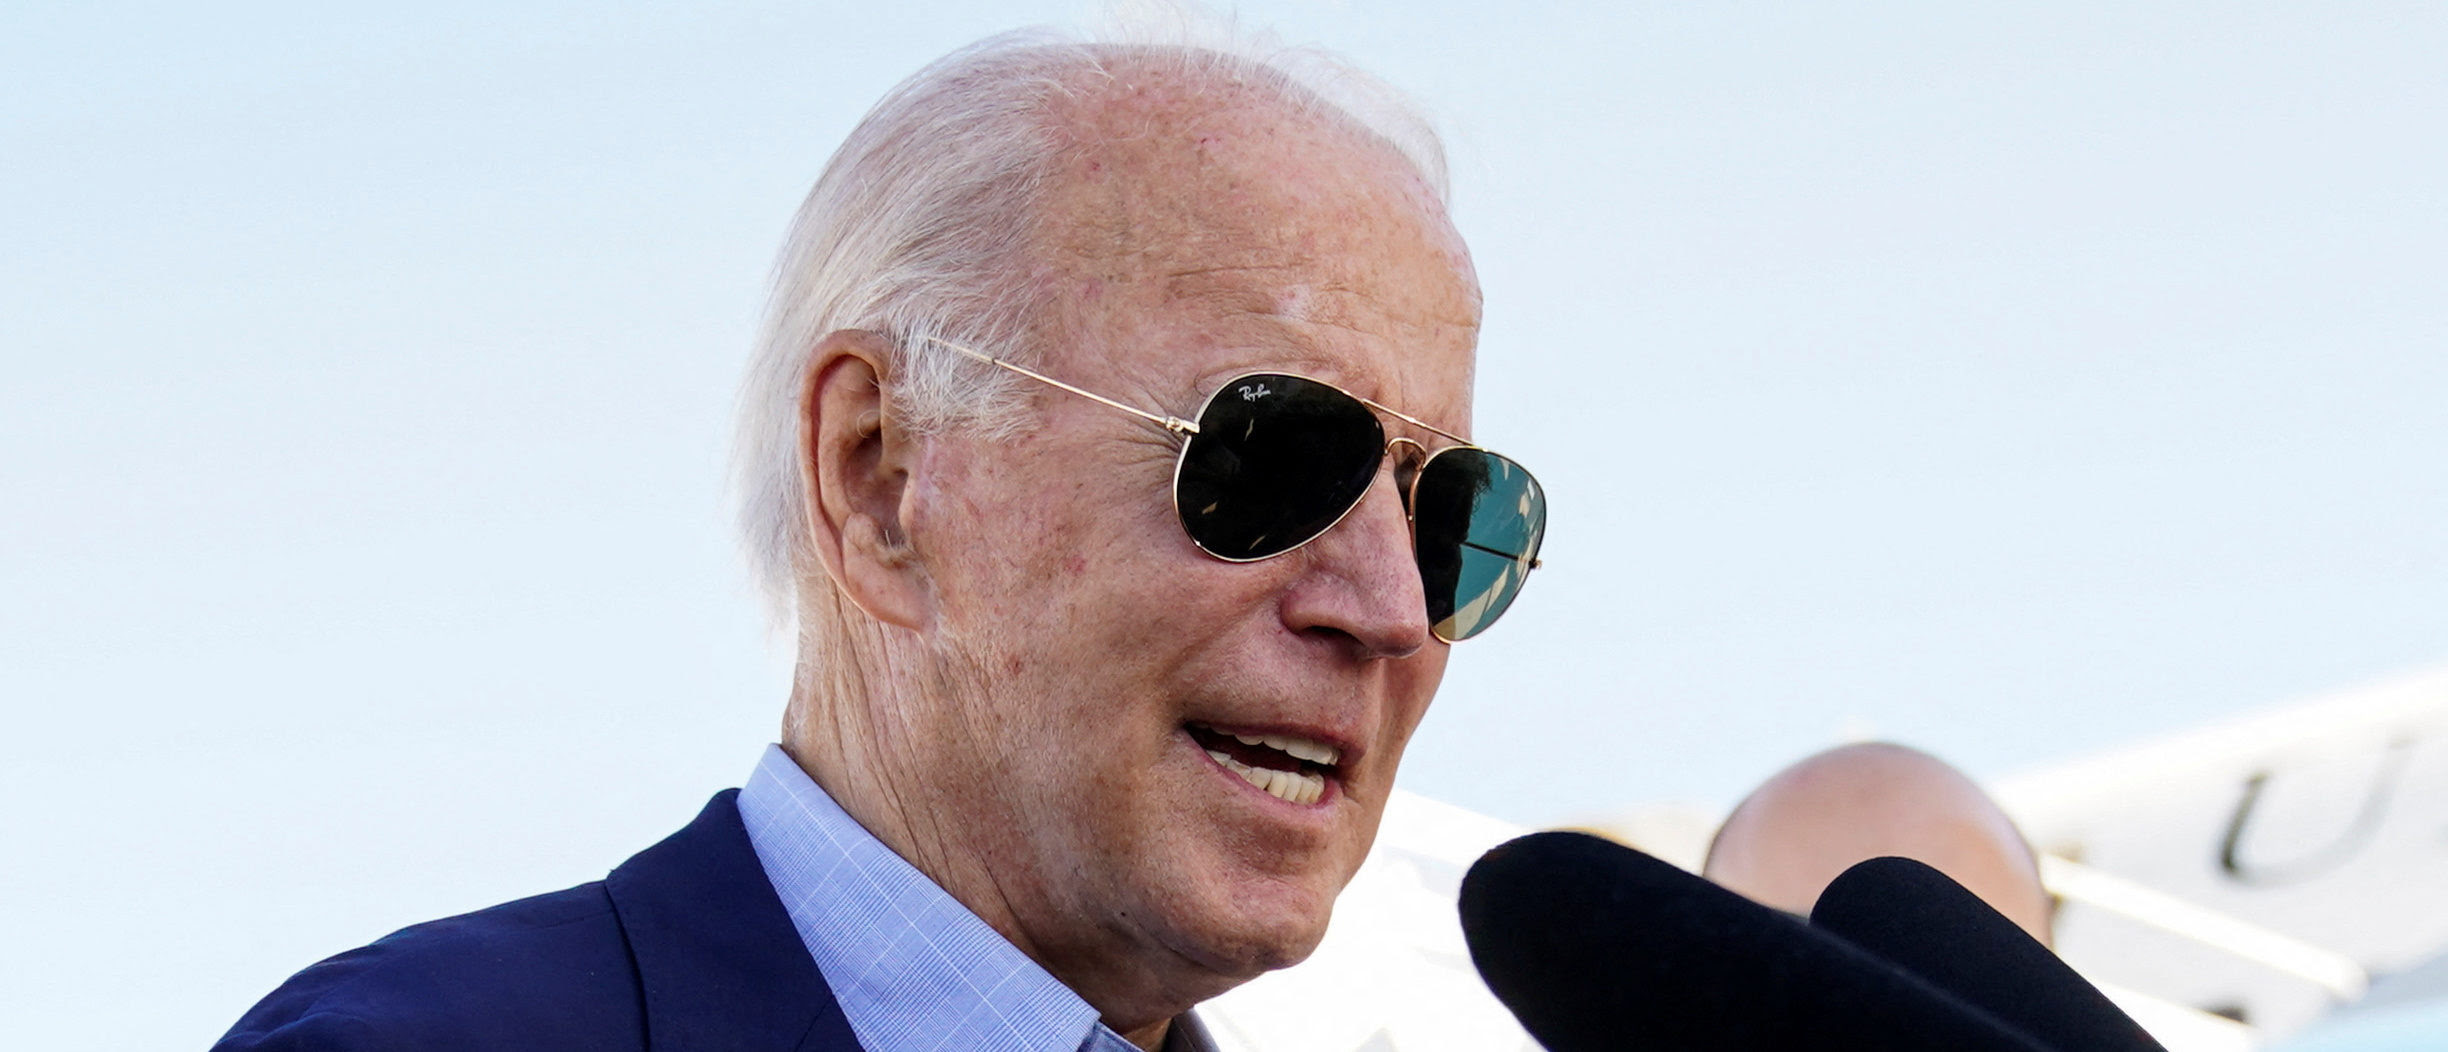 ‘Time To Take Risks’: Activists Push Biden To Take Harder Pro-Abortion Stance